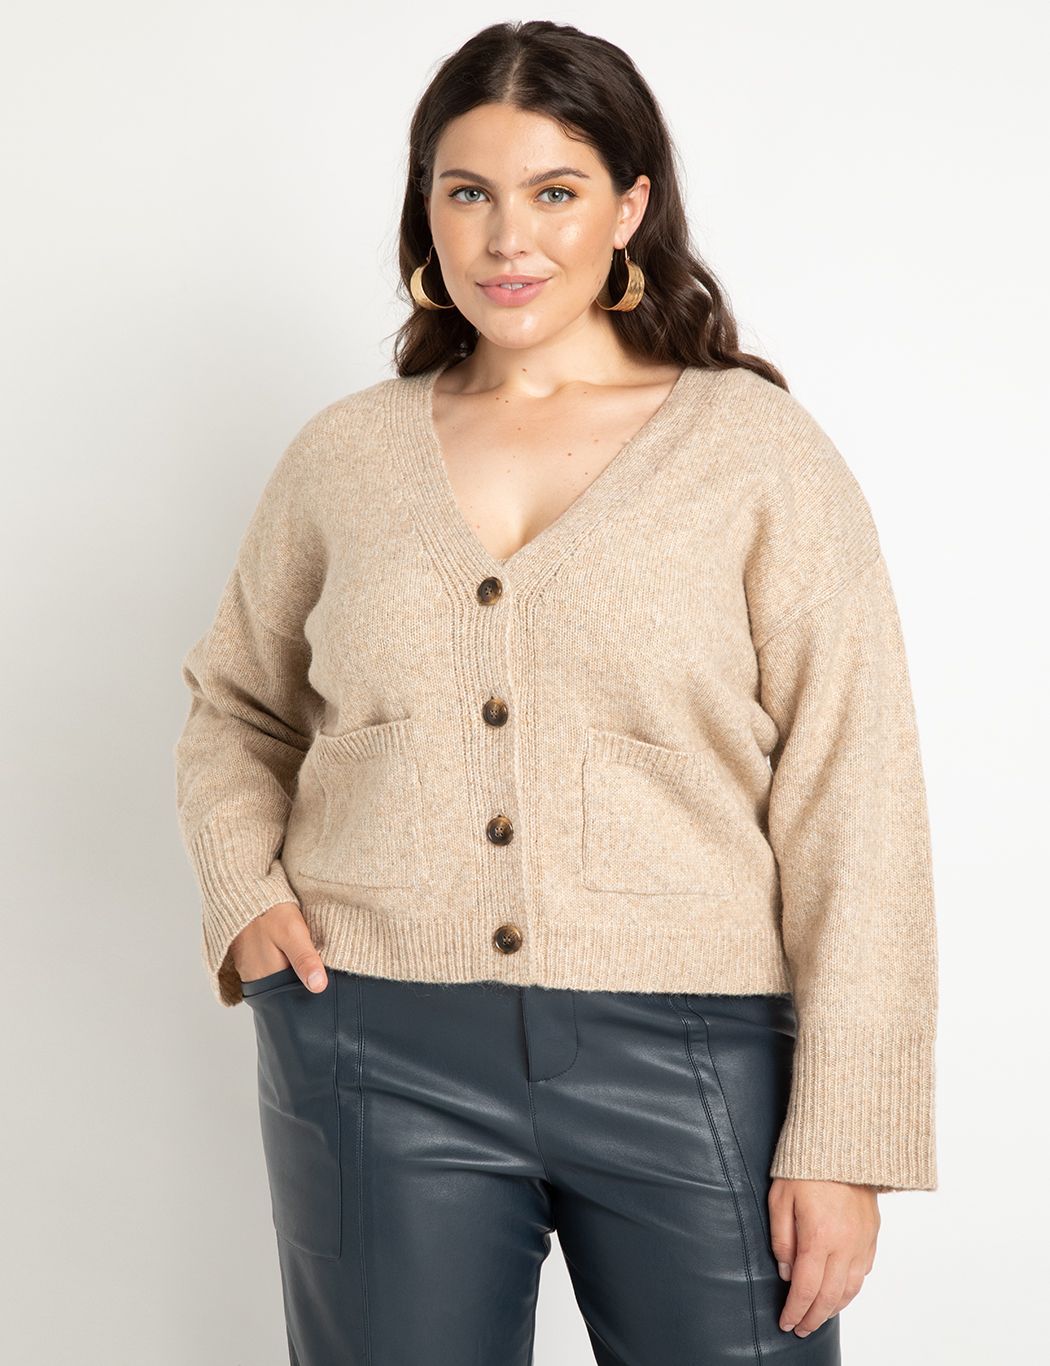 Cardigan Sweater With Pockets | Women's Plus Size Tops | ELOQUII | Eloquii